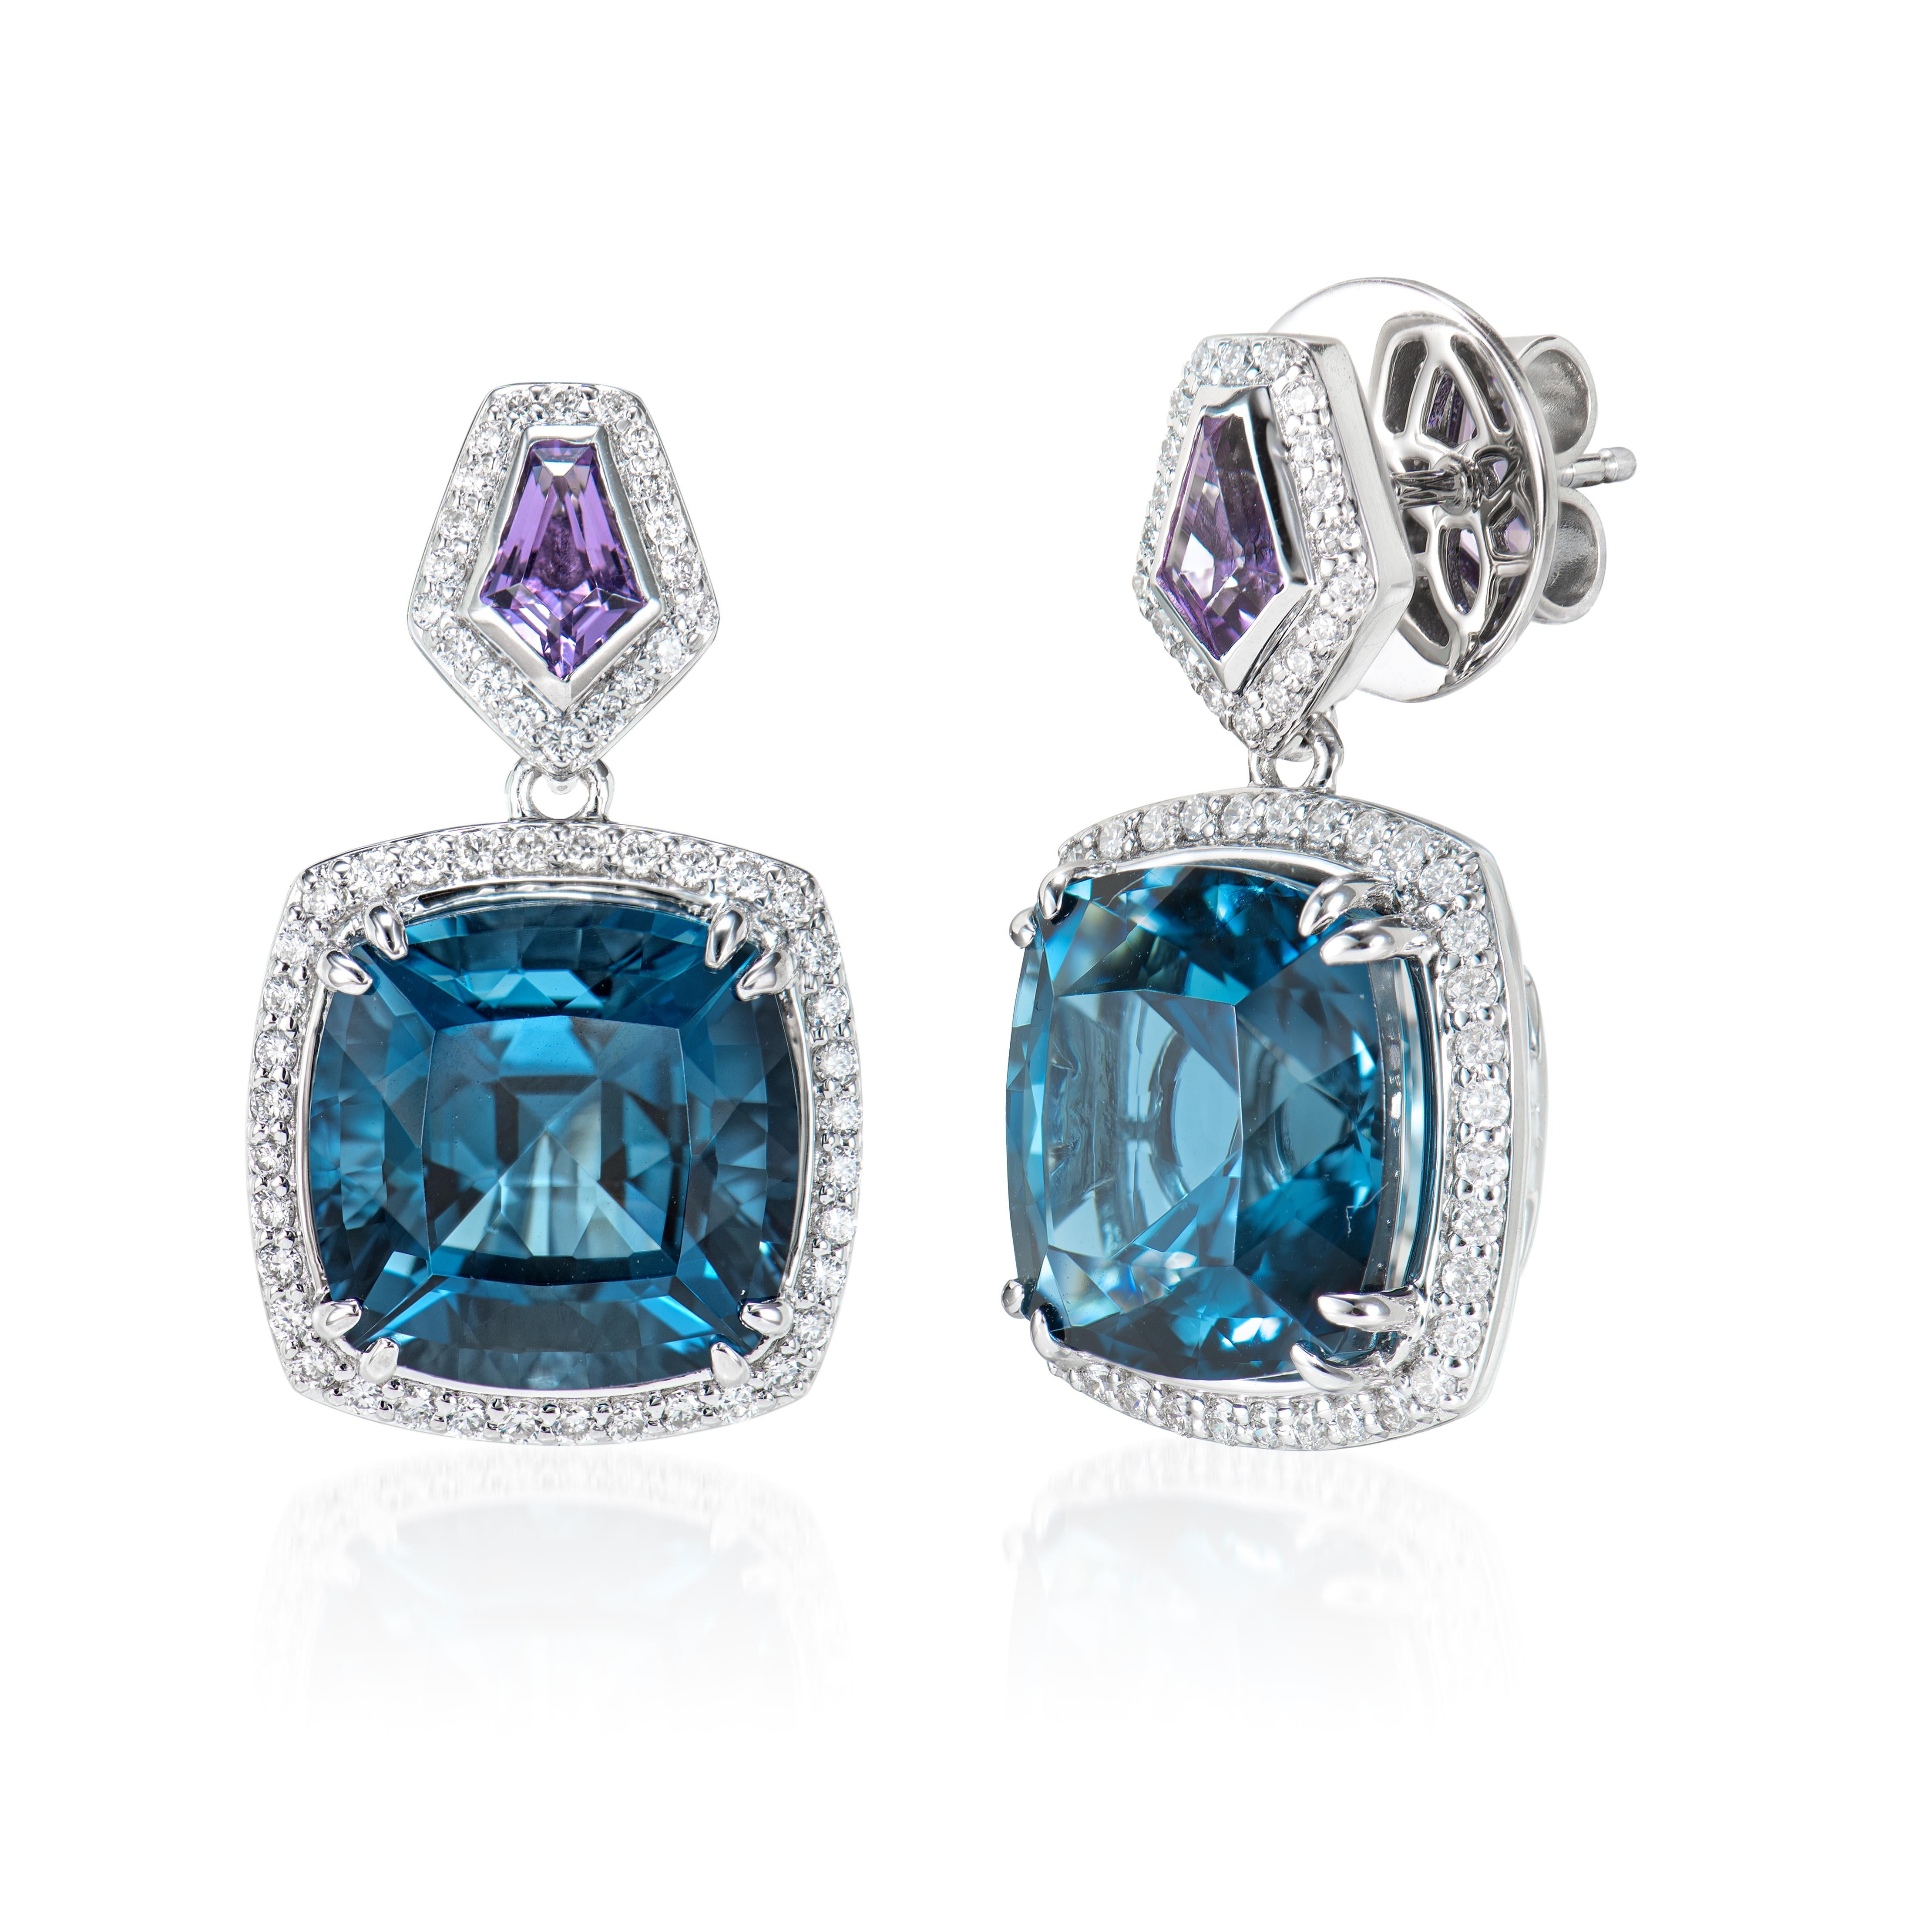 Cushion Cut 18.43 Carat London Blue Topaz Drop Earrings in 18KWG with Amethyst and Diamond. For Sale